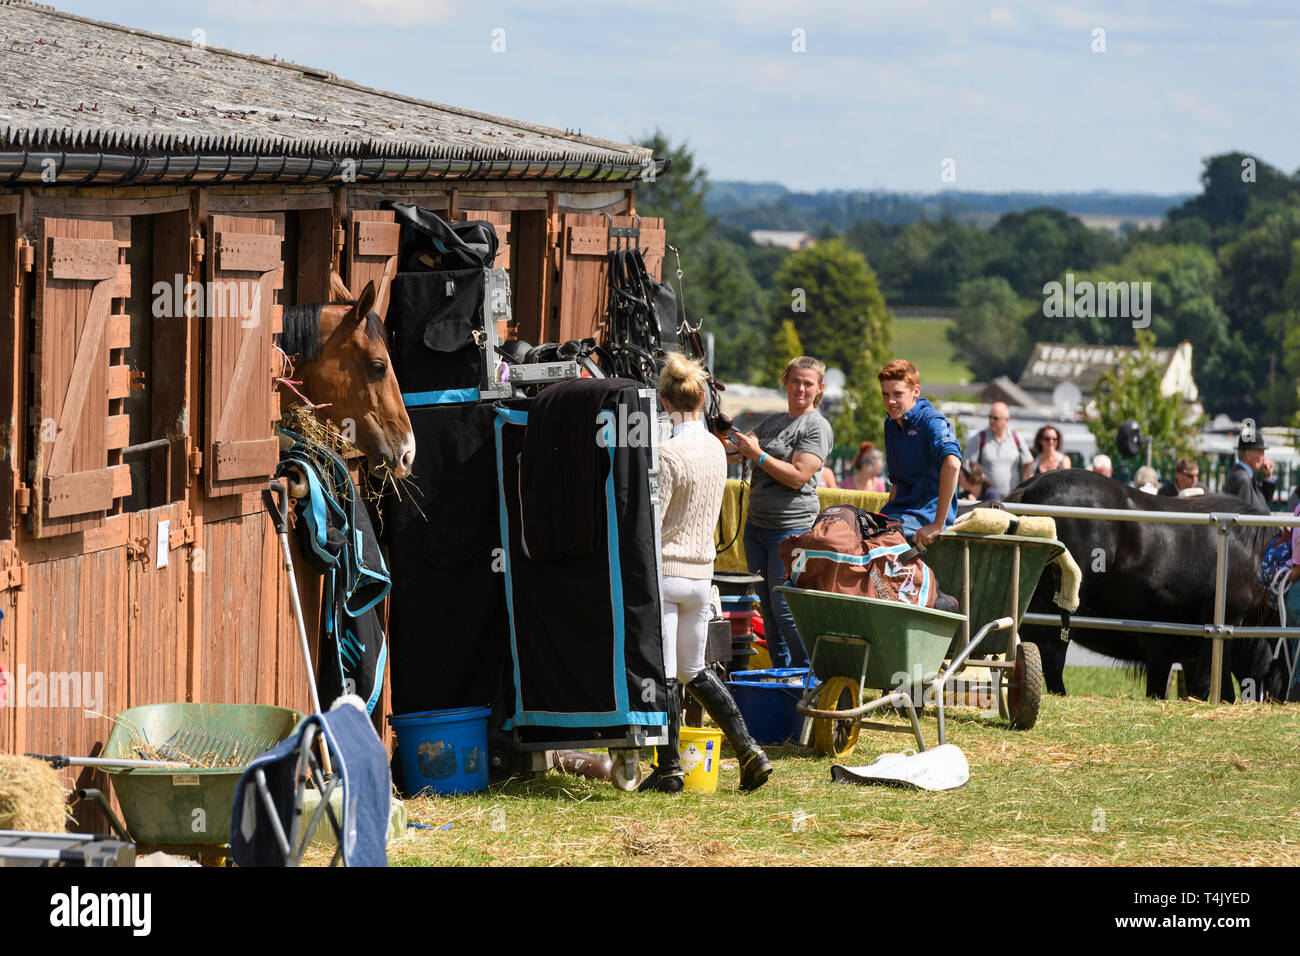 Grooms & entrants in equestrian completion prepare tack in stable yard as horse eating hay, looks over stable door- Great Yorkshire Show, England, UK. Stock Photo